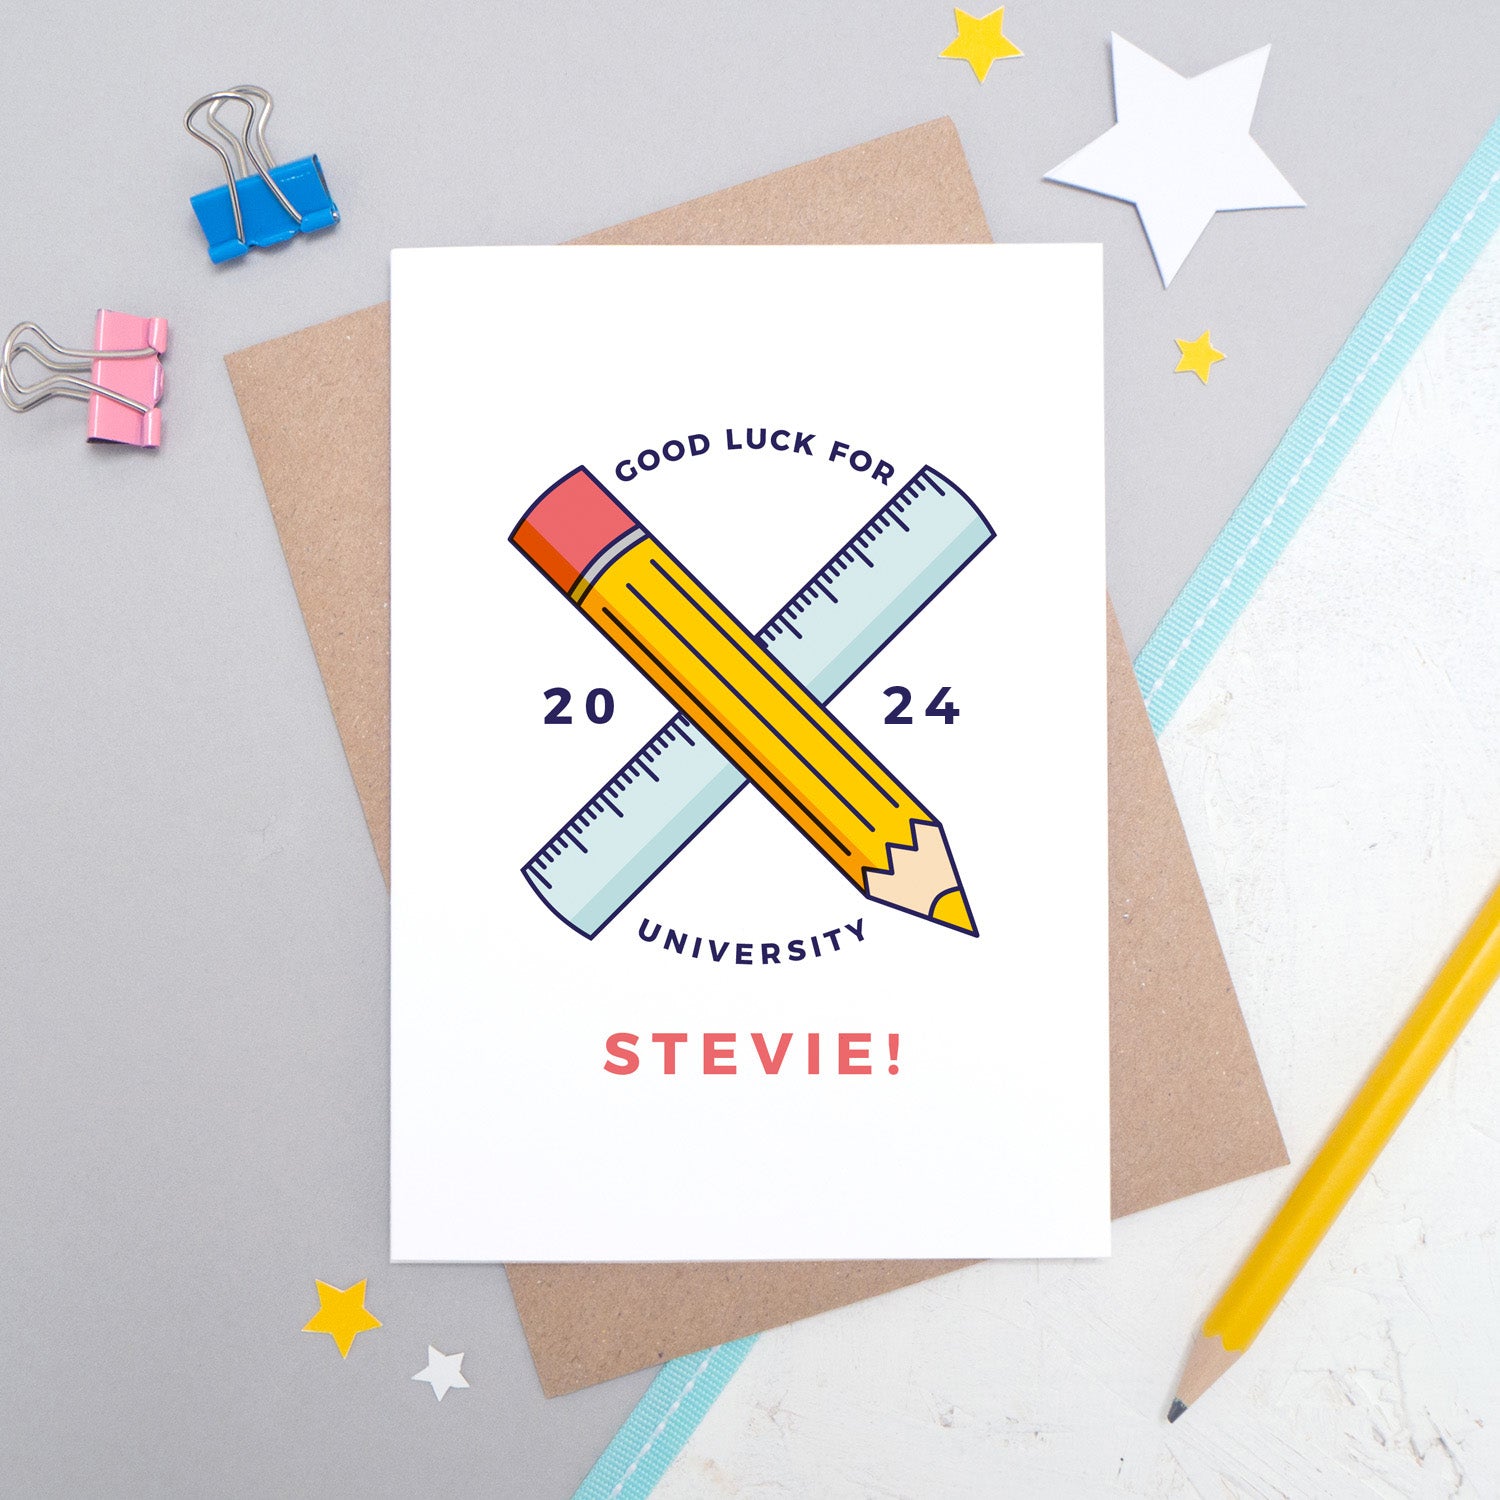 A good luck for university, personalised back to school card personalised with a young persons name, and a pencil and ruler illustration. The card is laid on it's kraft brown envelope on a grey and white background.